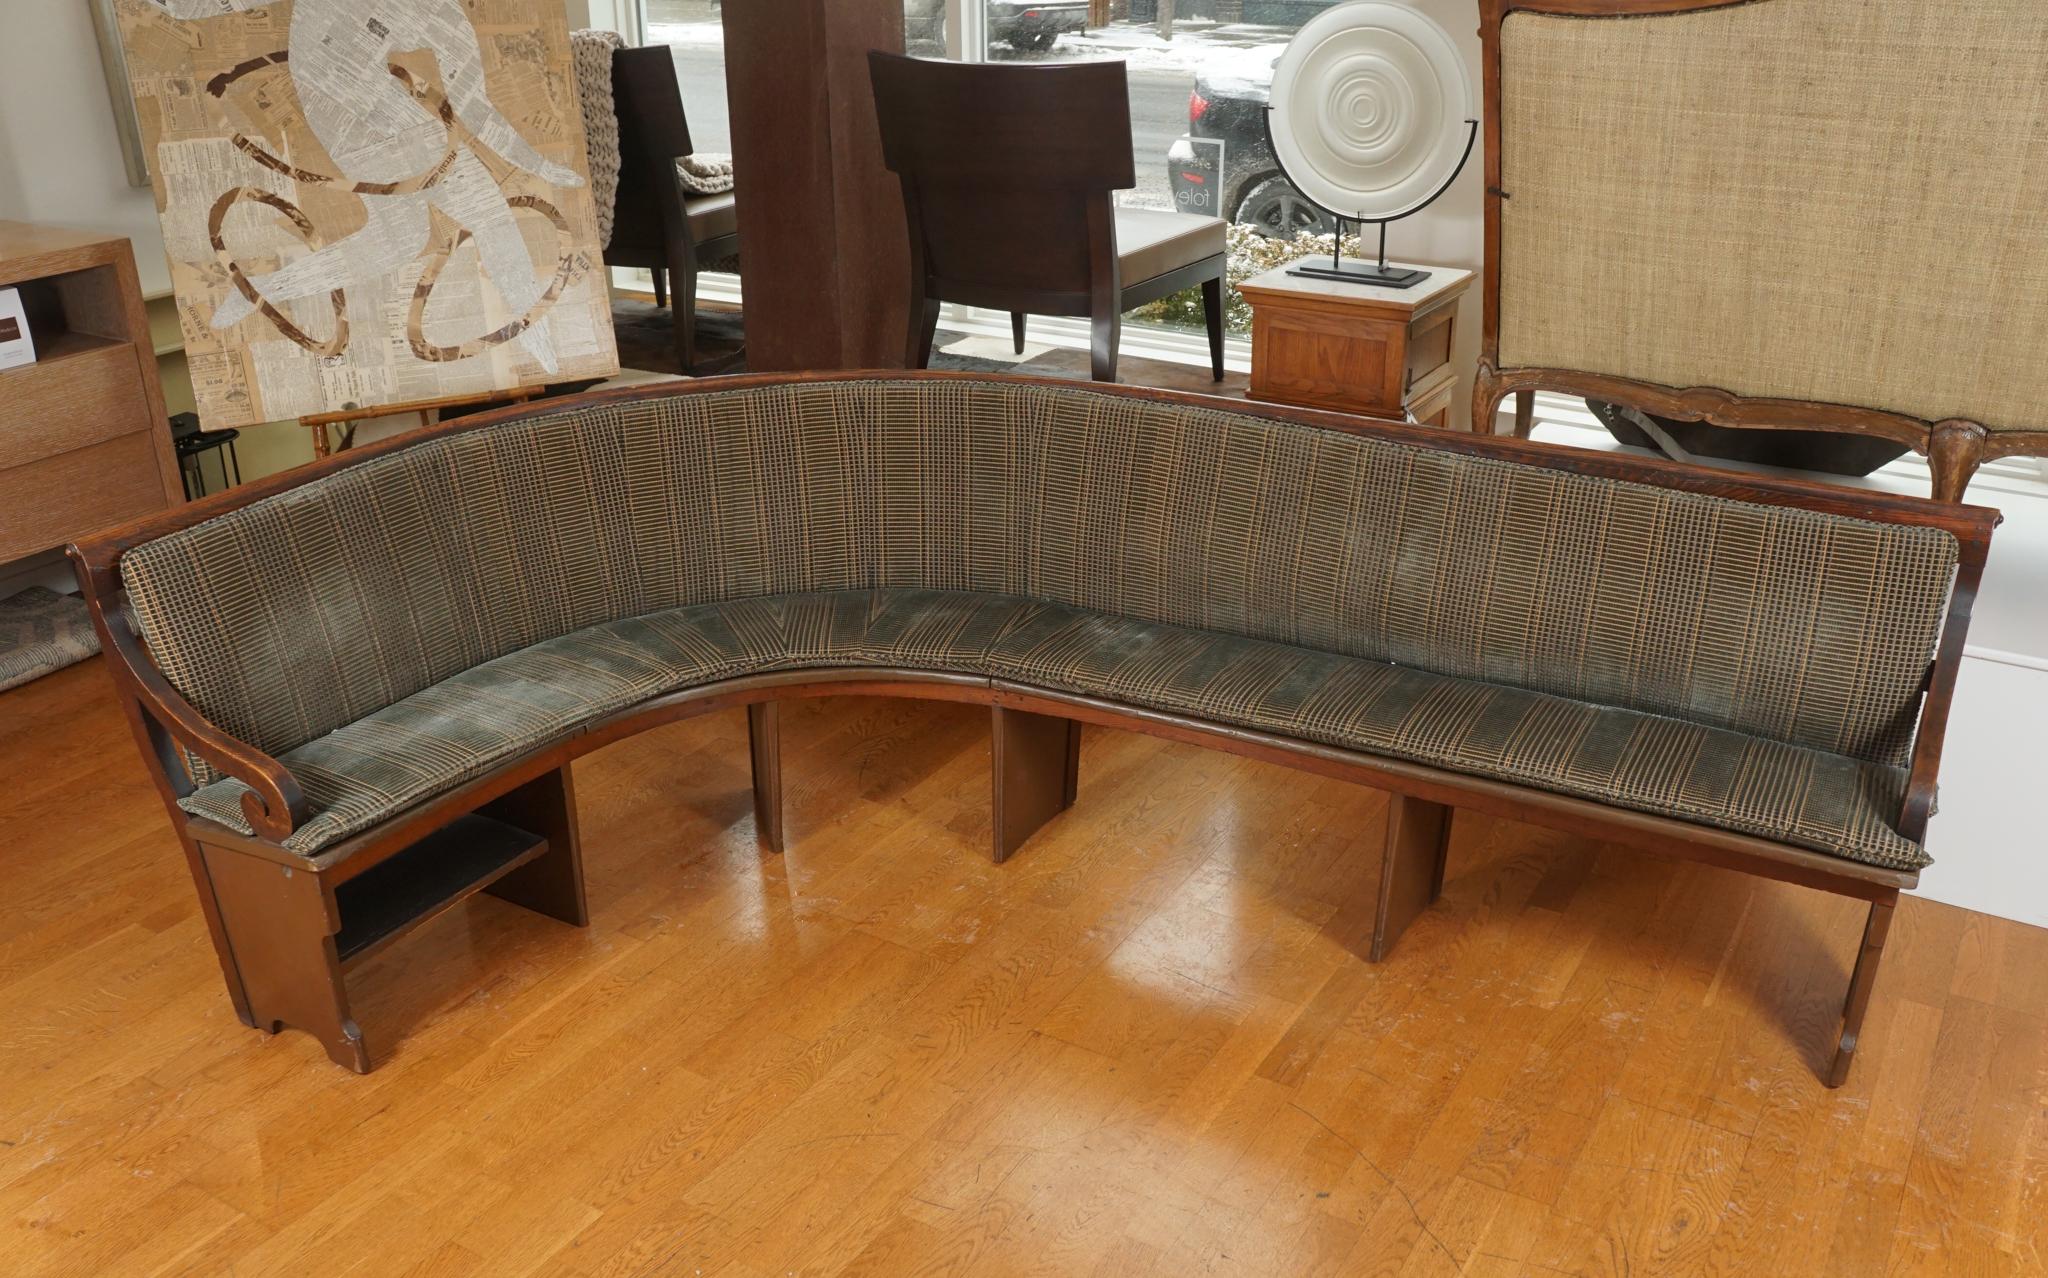 This gorgeous antique bench, was originally situated in a ferryboat station in Hudson, NY.
commensurate with age, this incredible bench shows a slight bit of wear. Truly a magnificent piece!